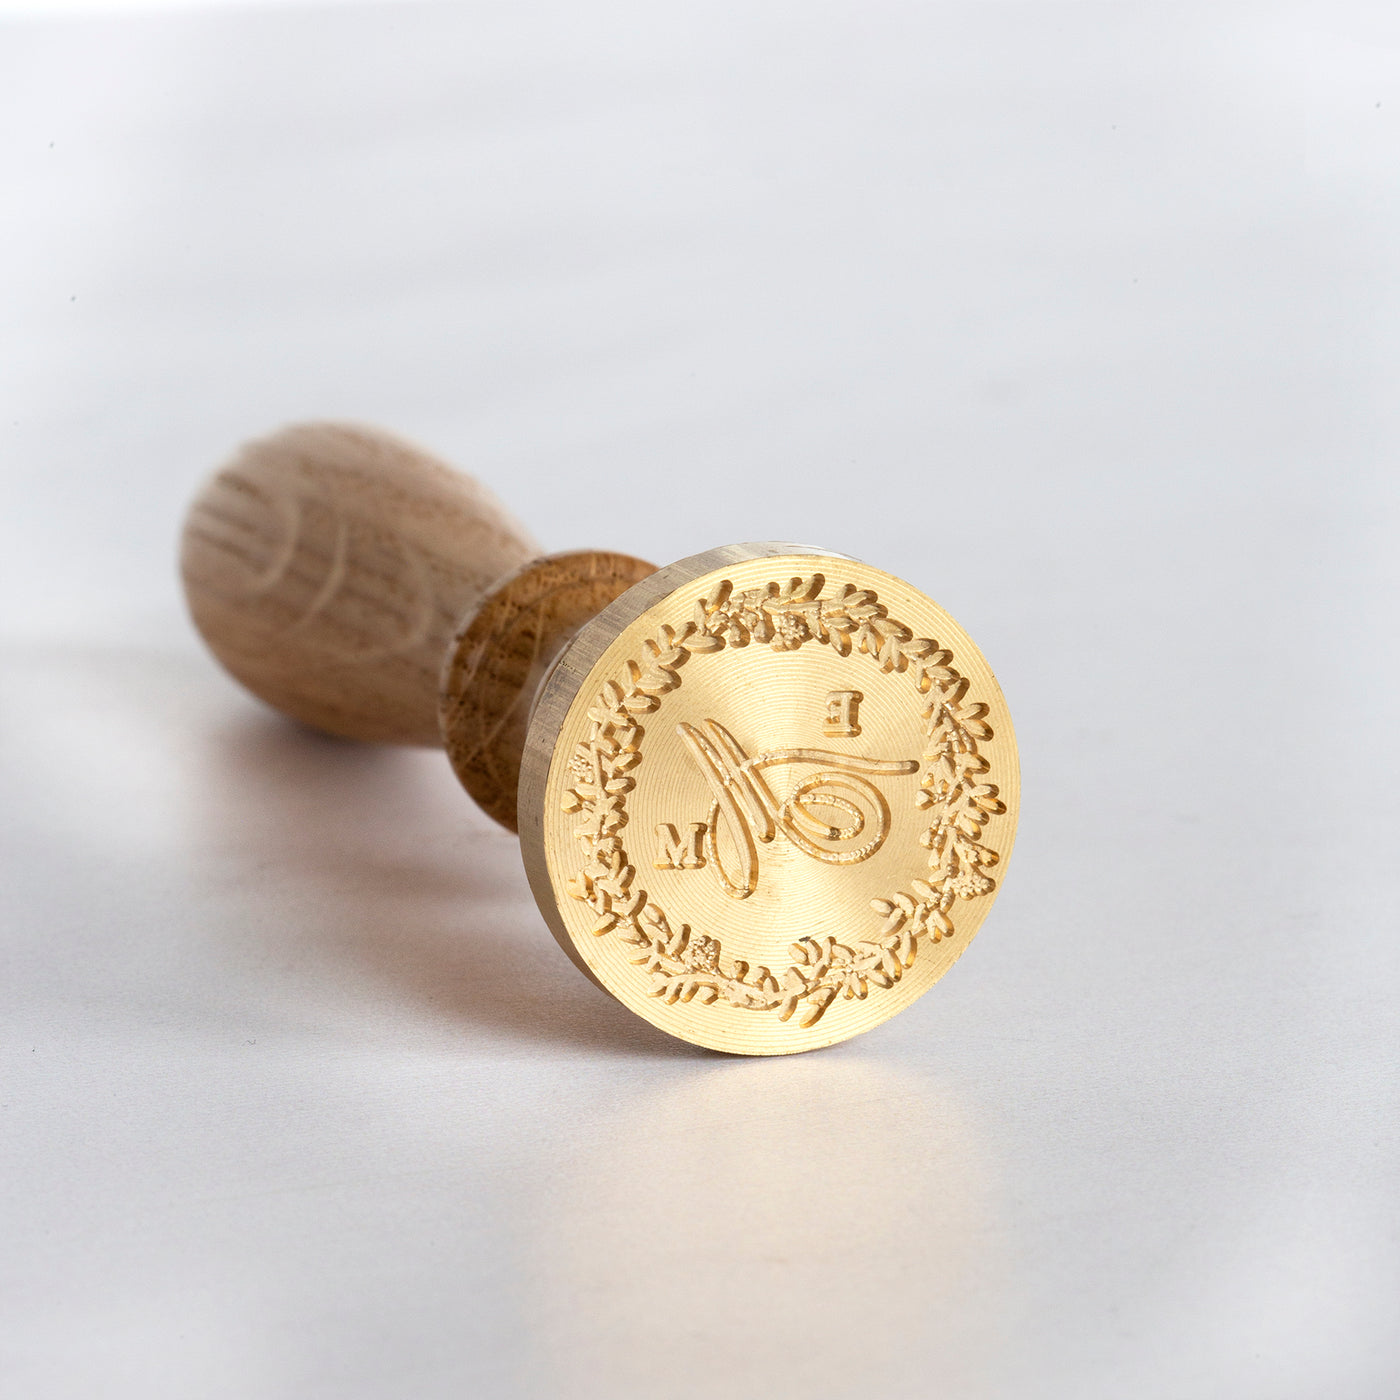 Custom Wax Seal Stamp - Oval Fully Customized Wax Seal Stamp with Your Own Artwork